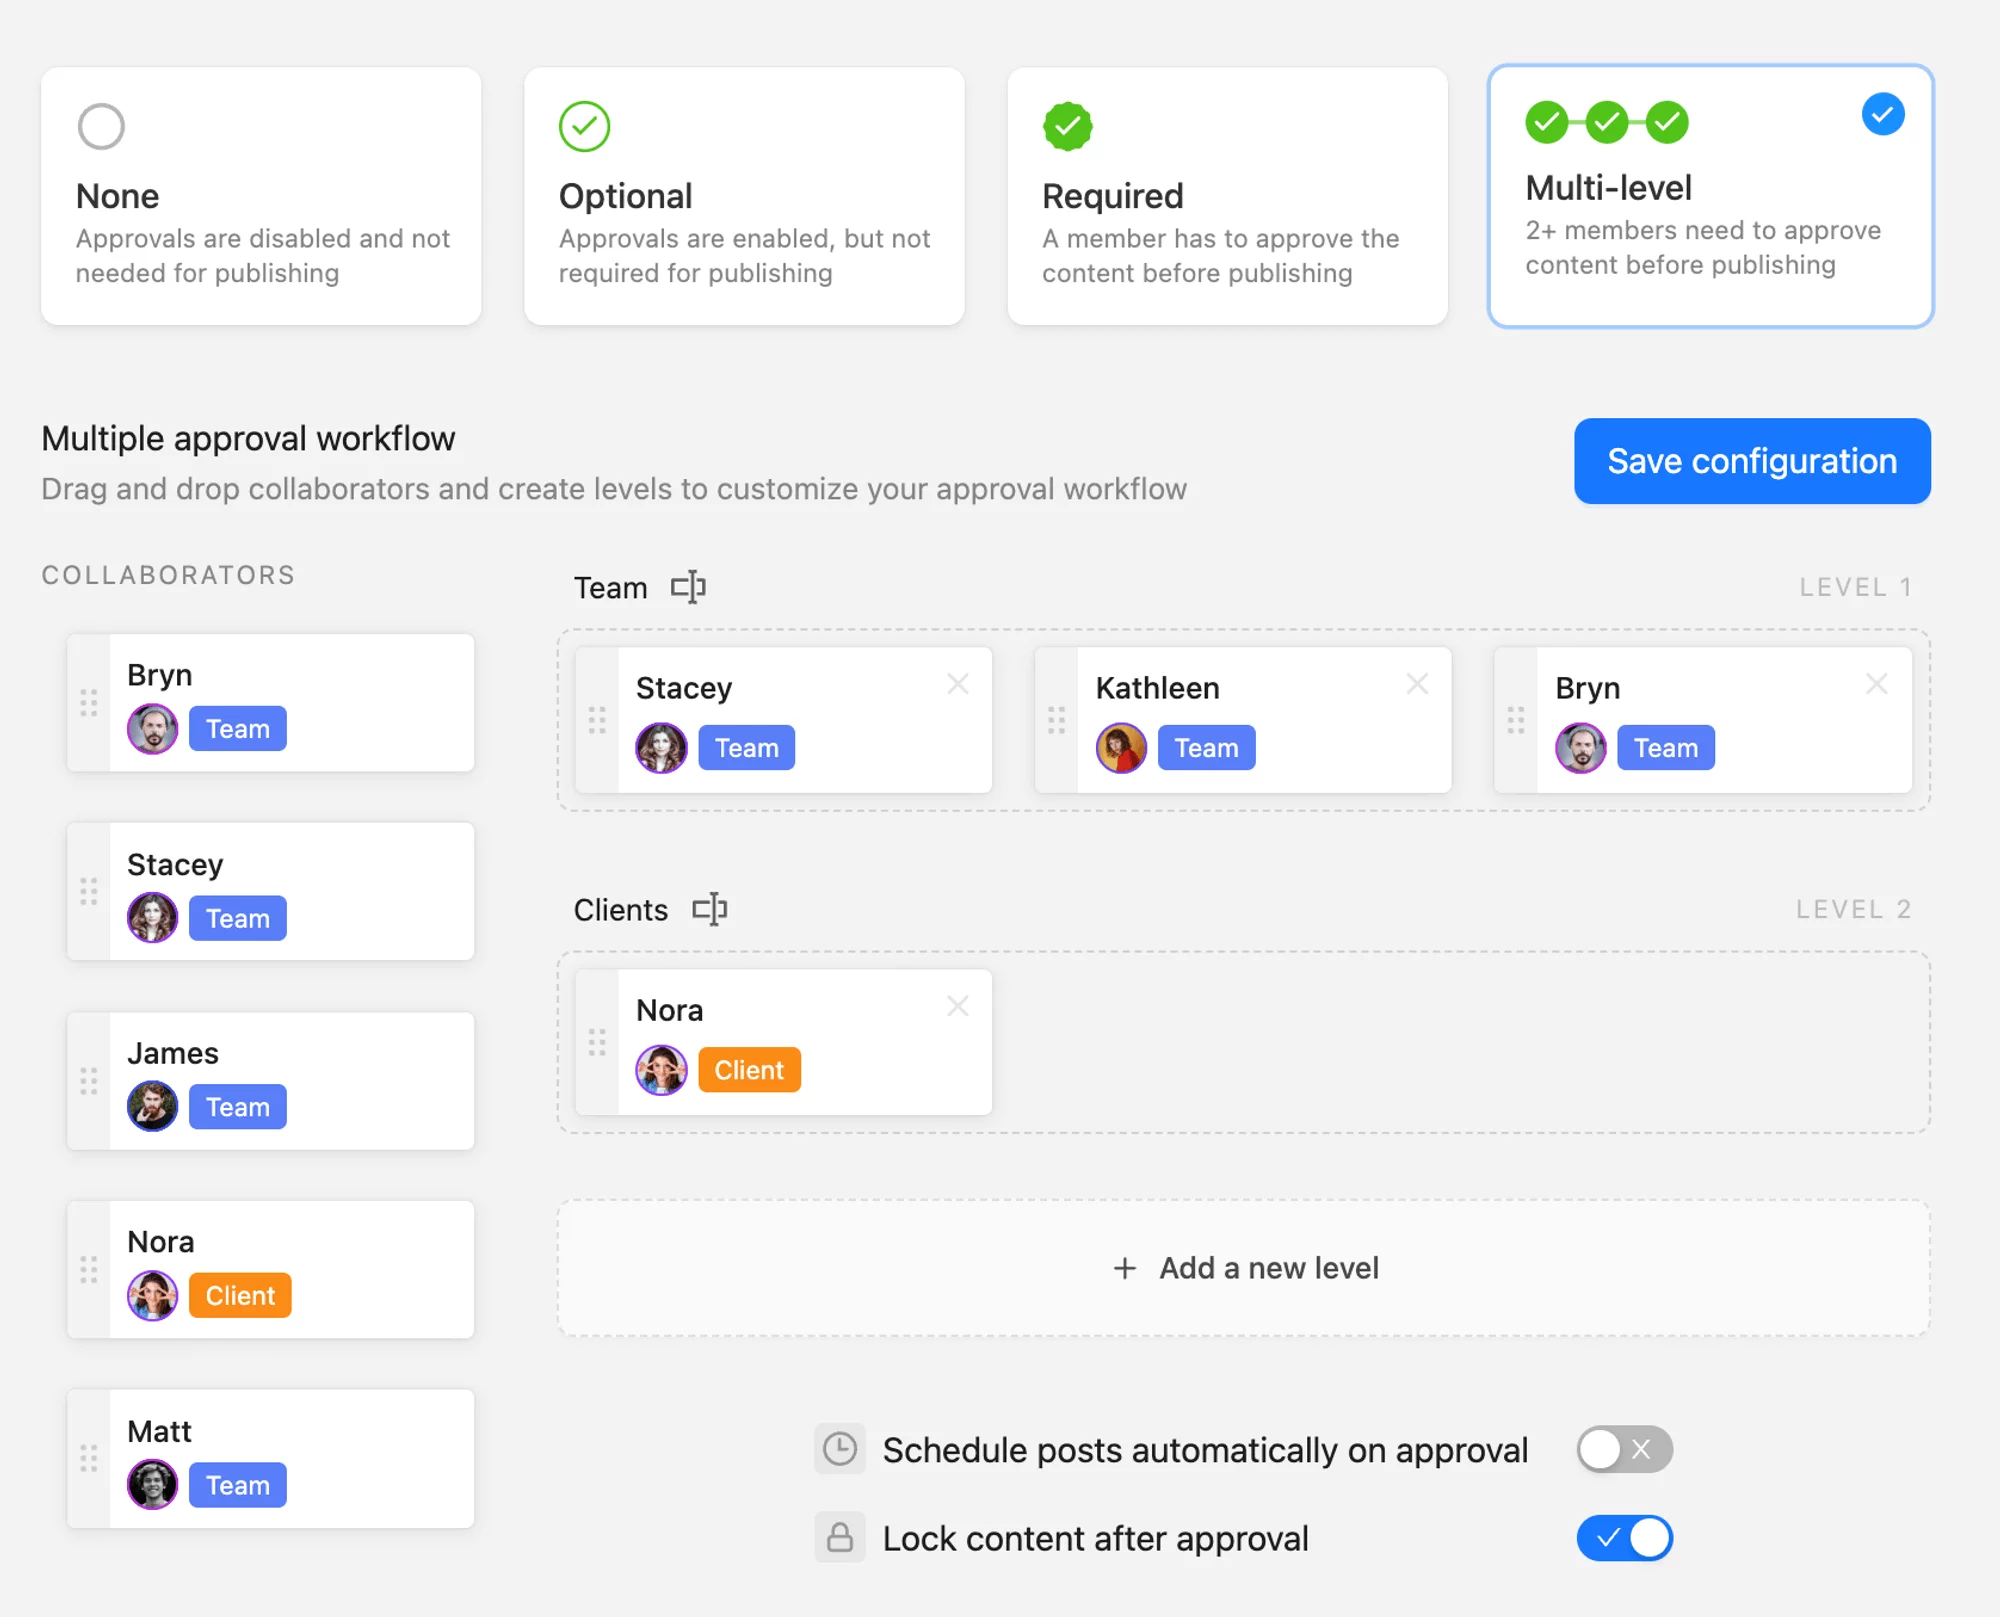 Content approval workflow configuration screen with options for approval levels, collaborators, and clients, featuring a multi-level approval process.